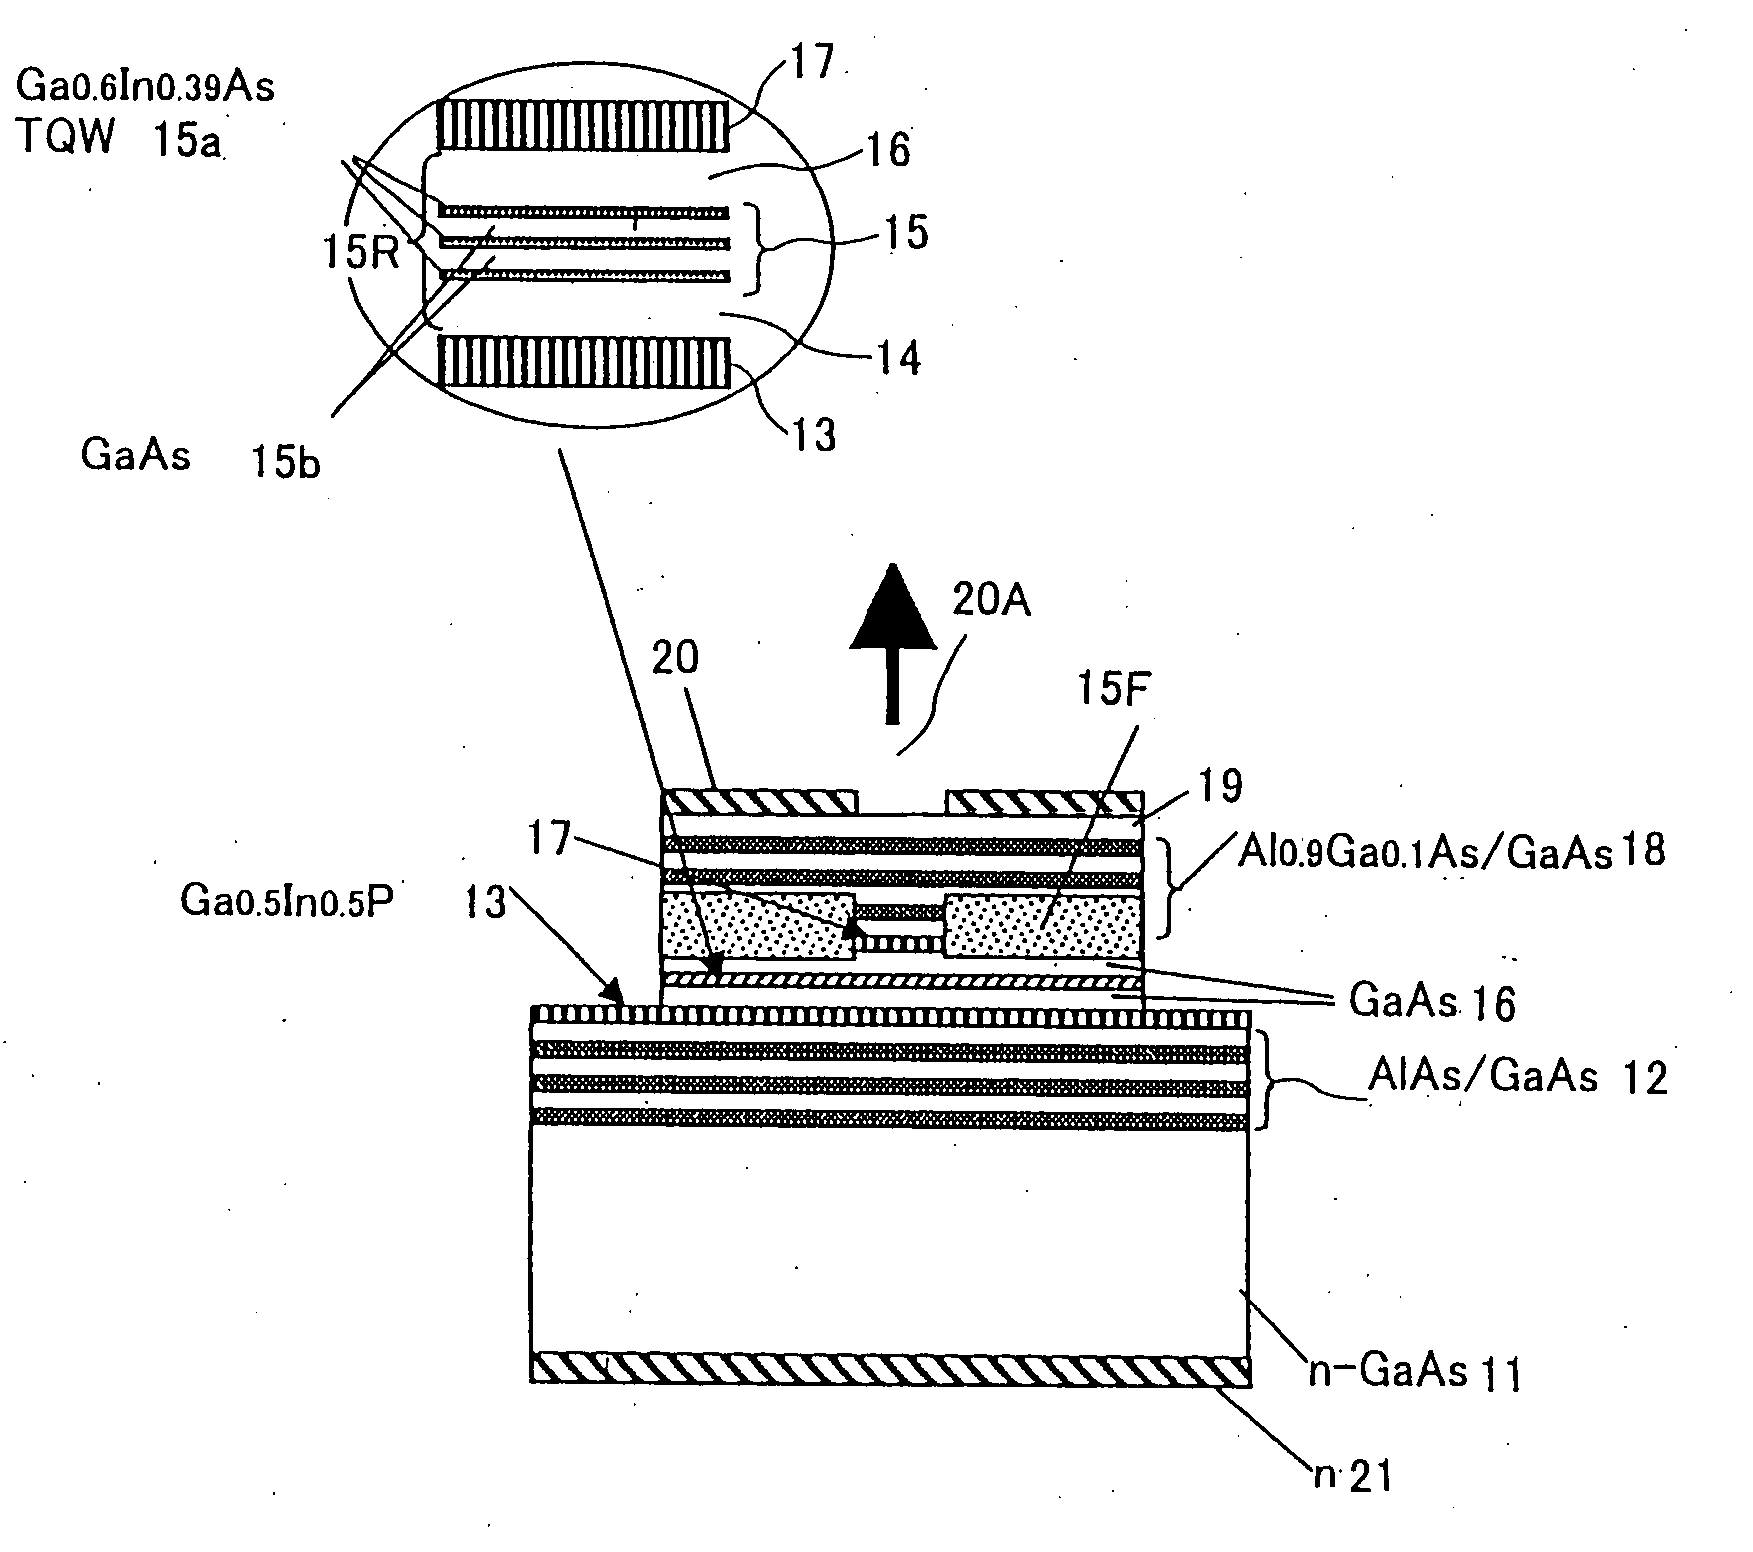 Surface-emission laser diode operable in the wavelength band of 1.1-1.7 um and optical telecommunication system using such a laser diode